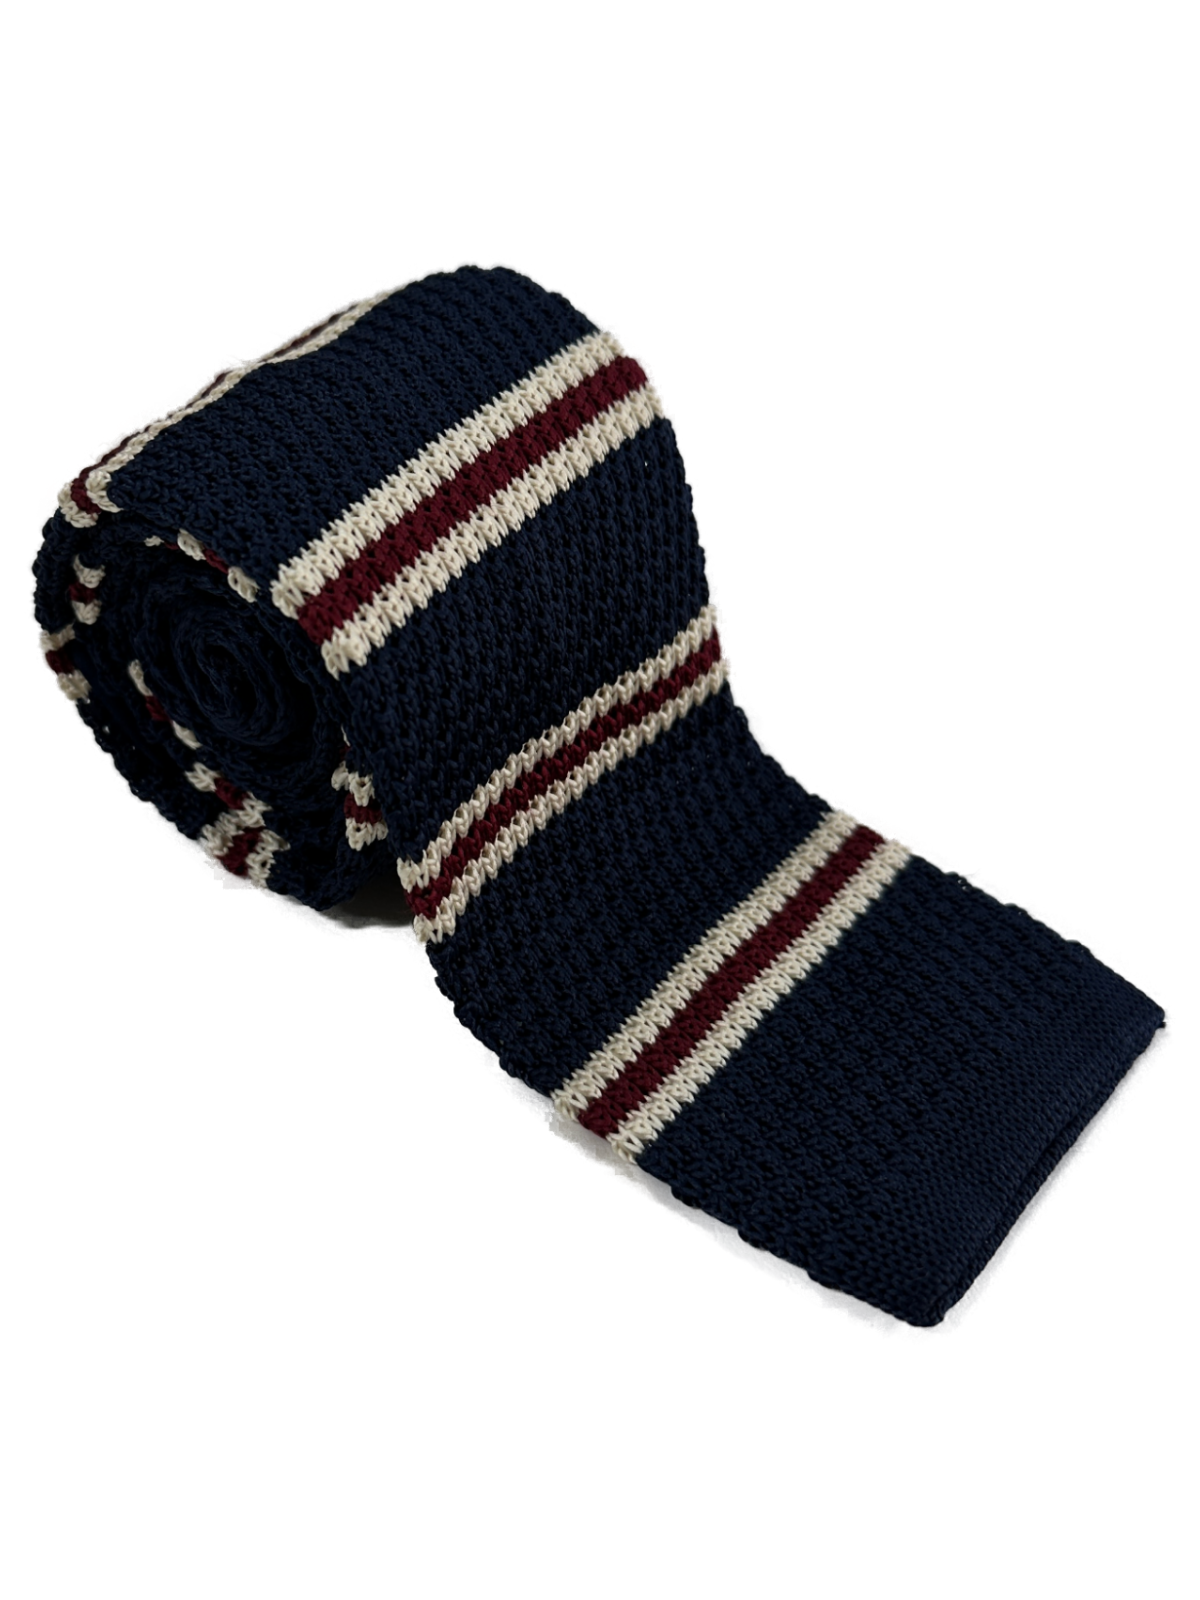 Ivy knitted tie - Navy &amp; Red